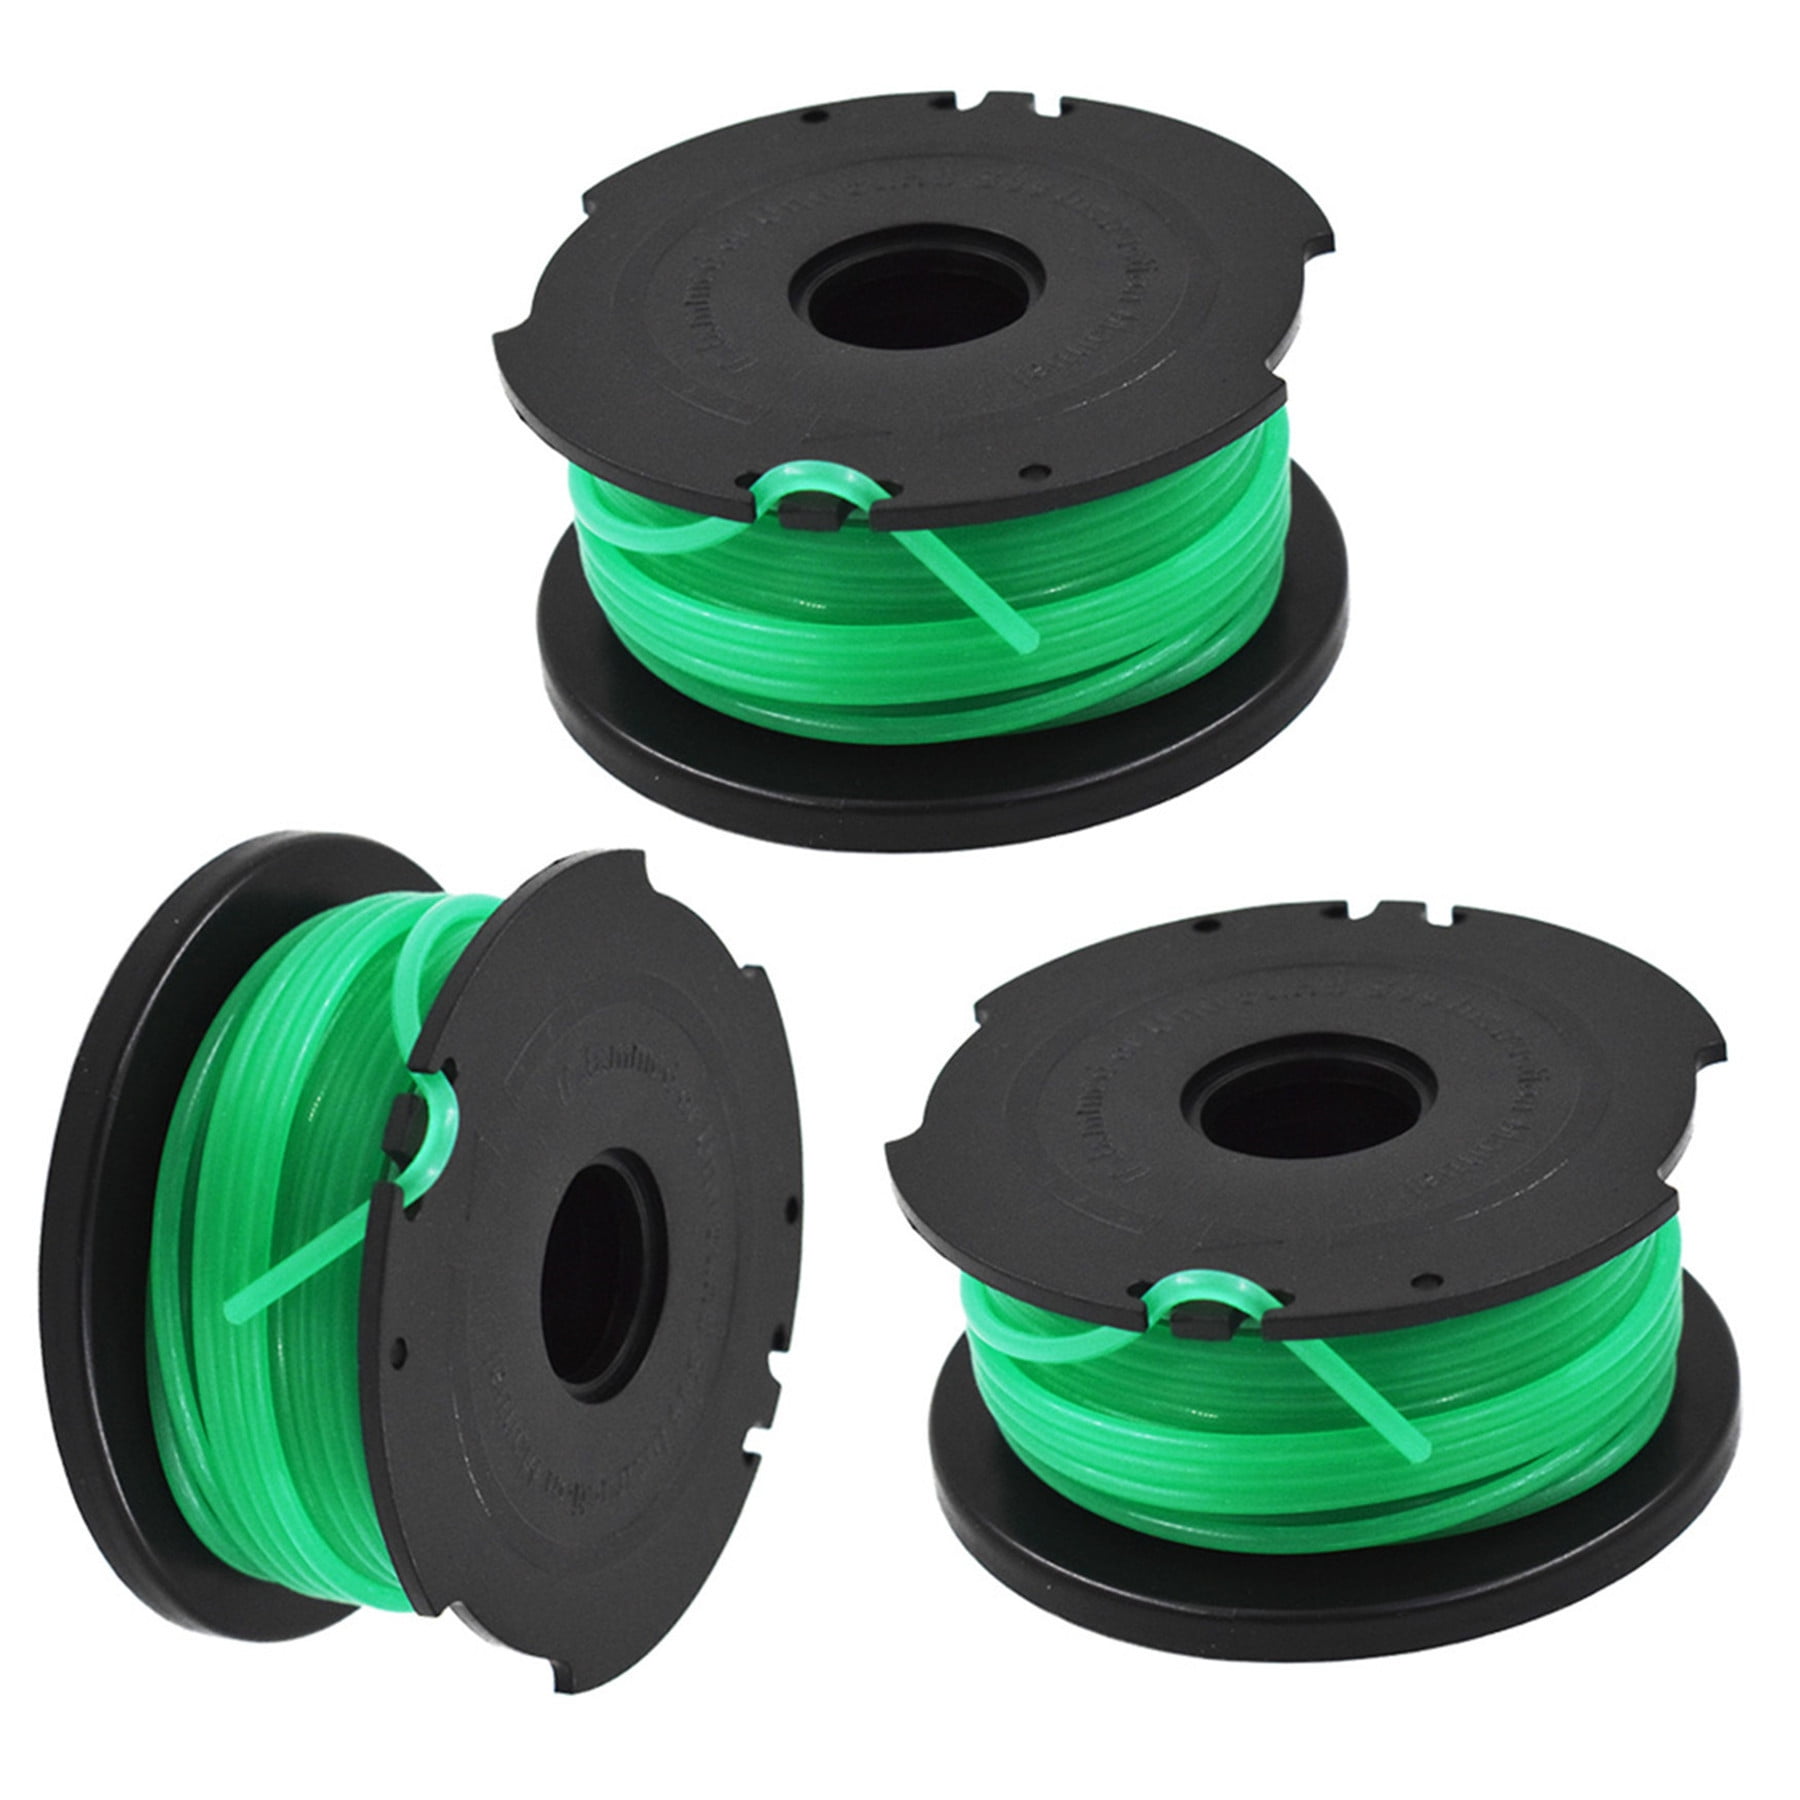 SF-080 Replacement Spool，GH3000 Trimmer Spools Auto Feed,Compatible with Black and Decker Weed Eater LST540 LST540B SF-080-BKP String Trimmer- 7 Pack Auto Feed Replacement Spools,20-Foot 0.08-Inch